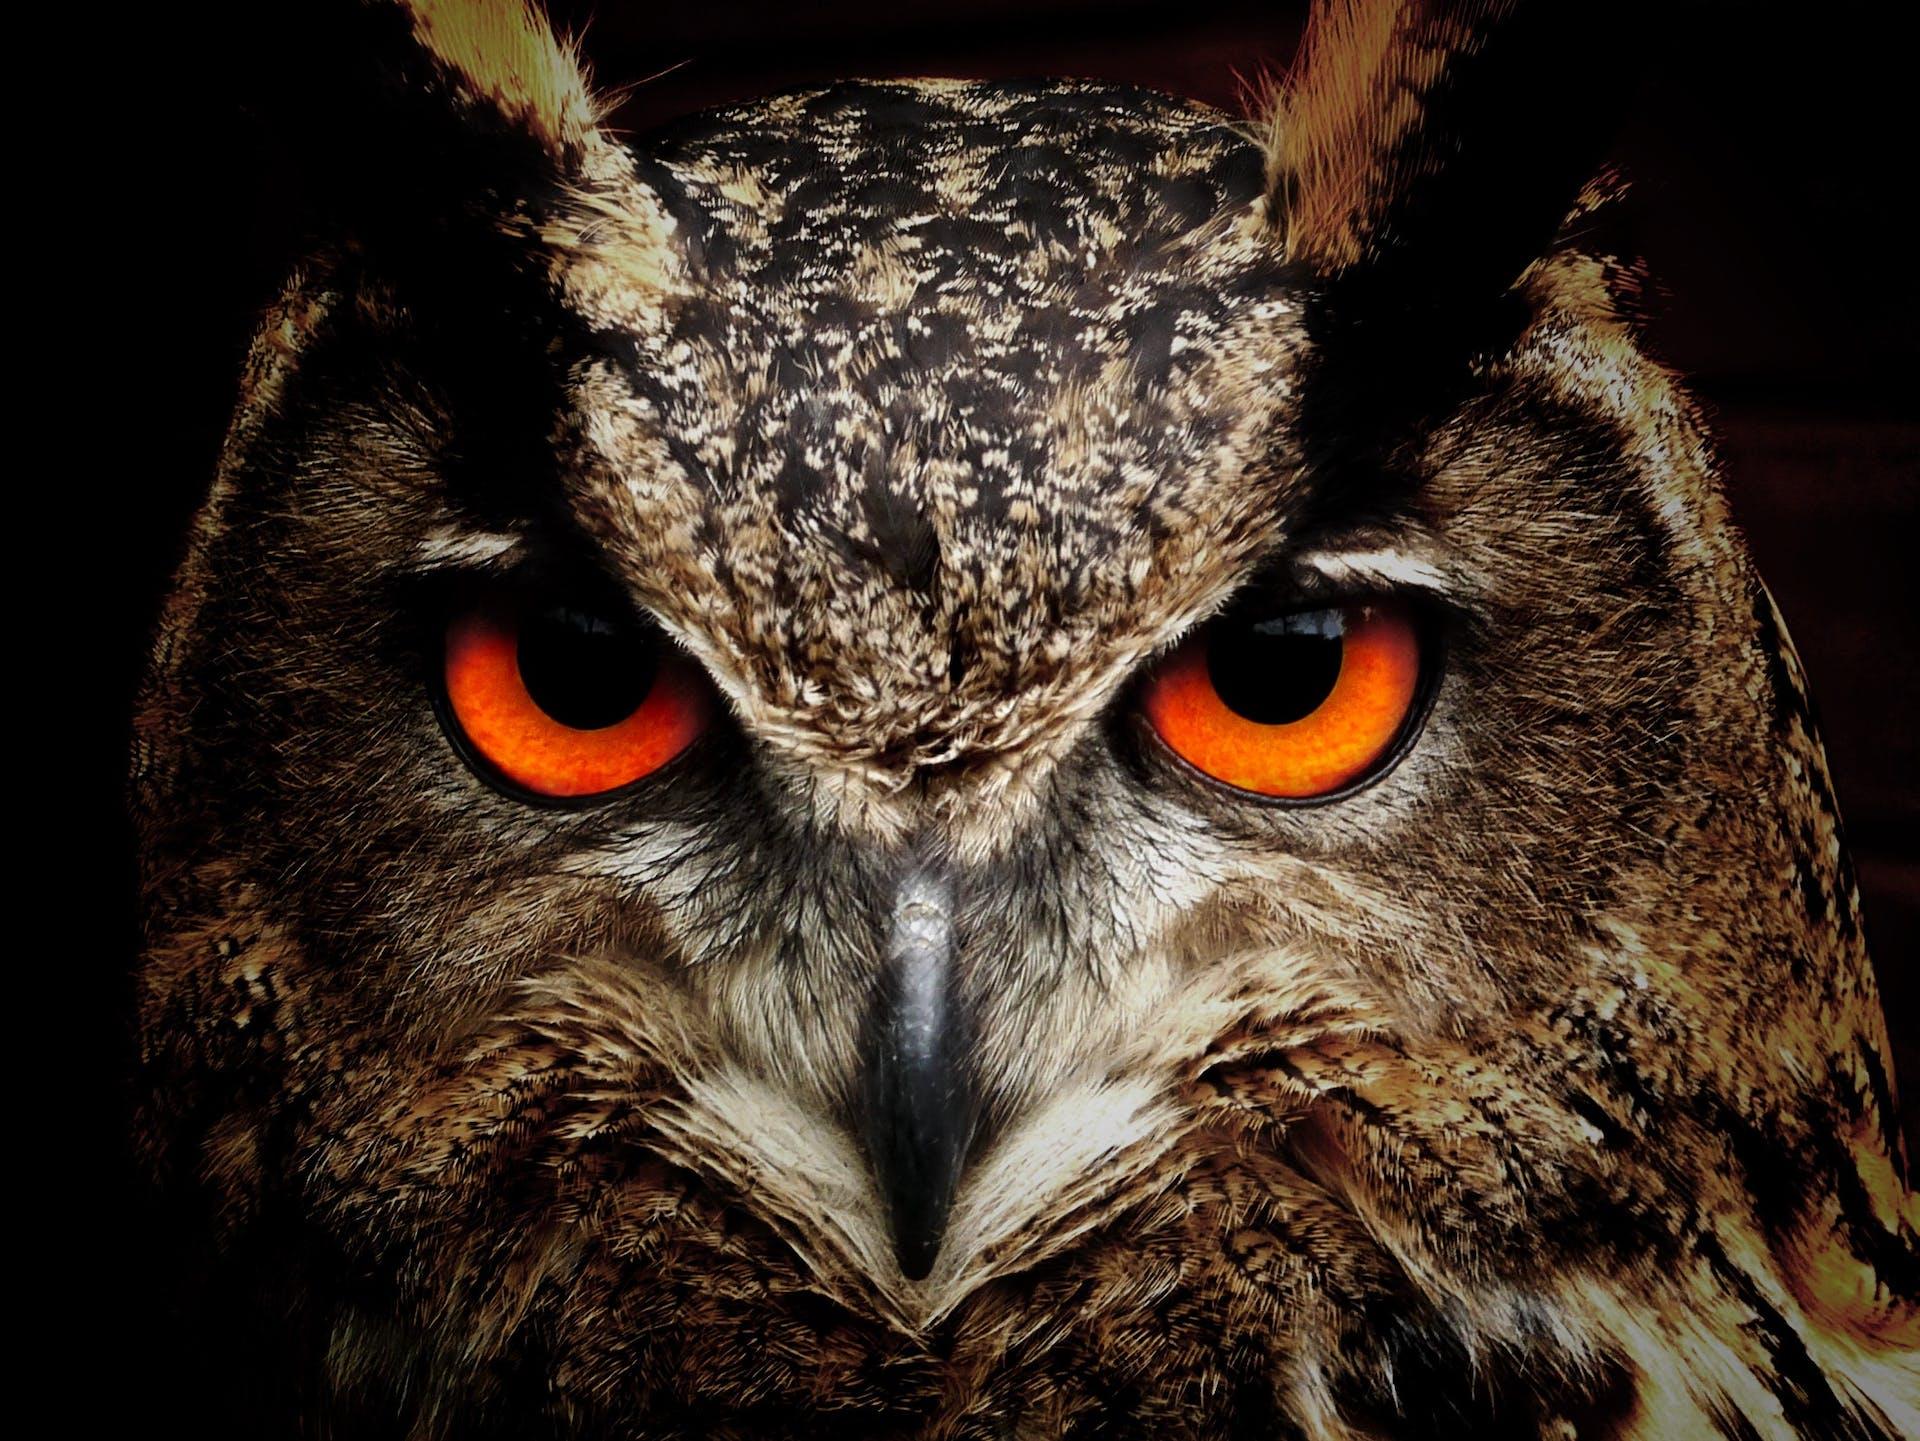 Close up of owl face with orange eyes glowing.